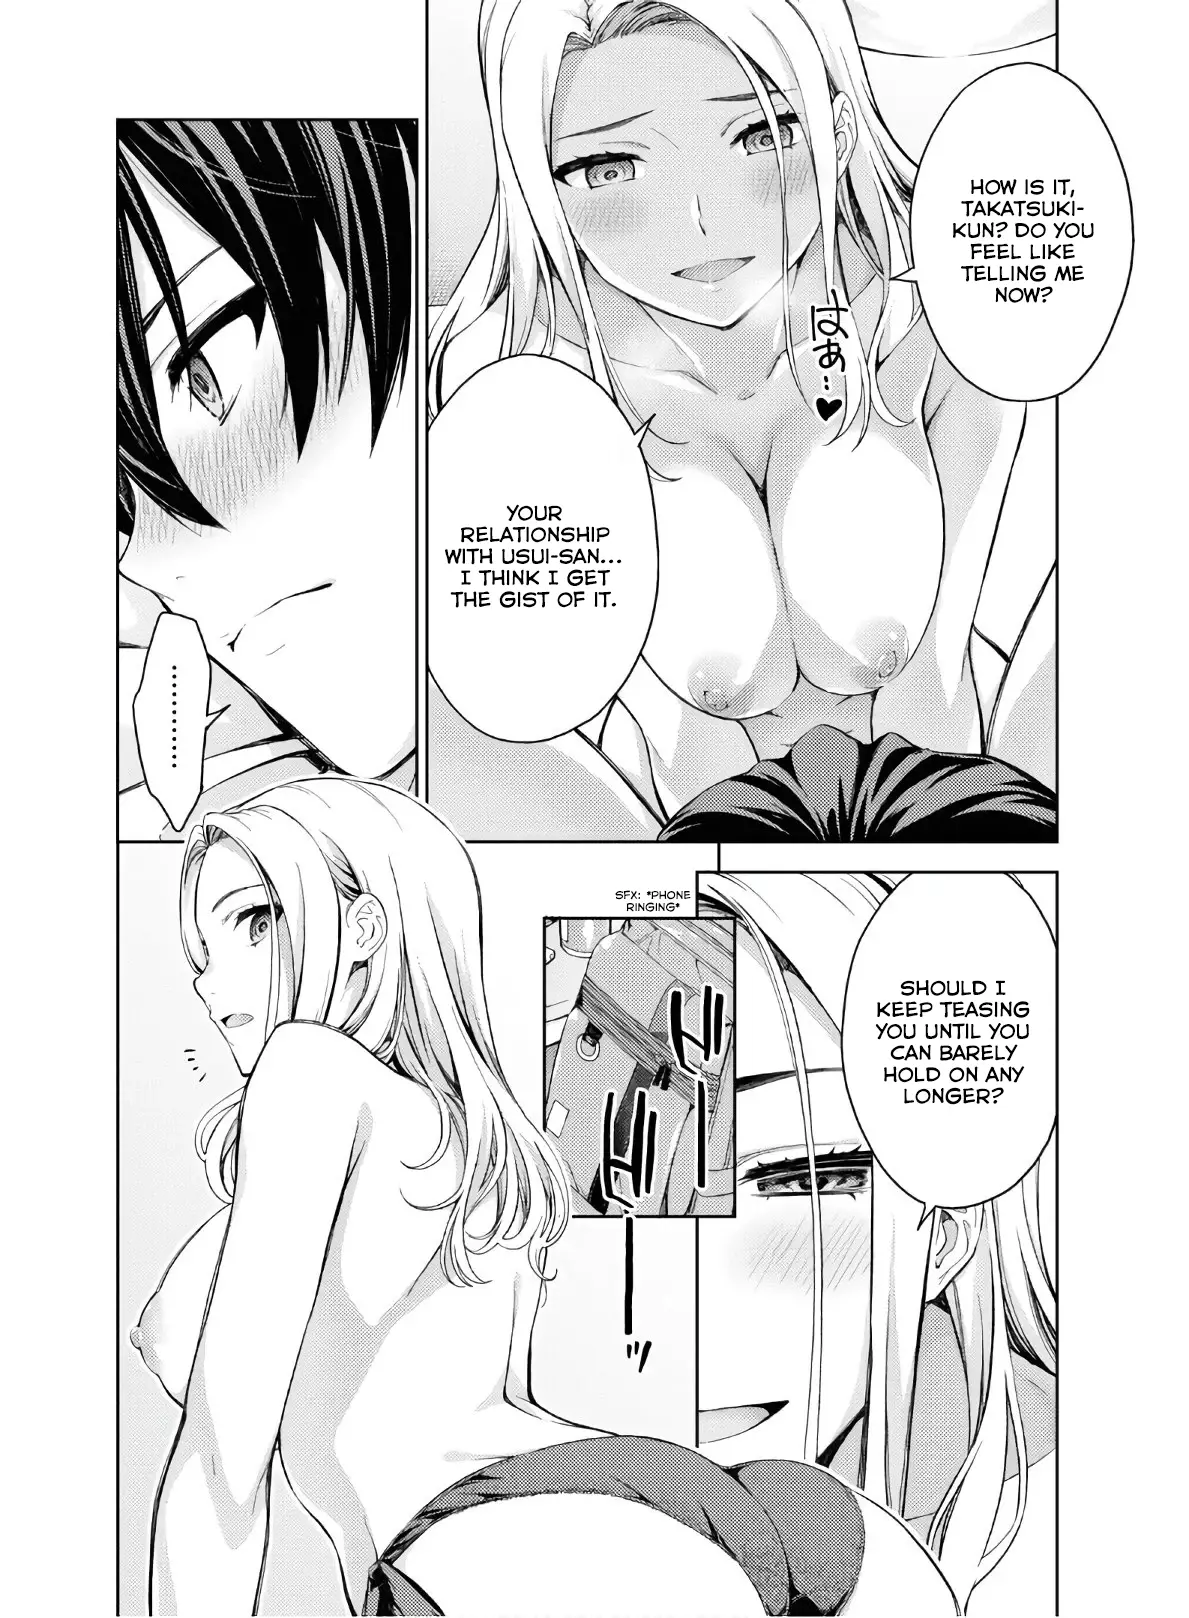 Lust Geass - 22 page 22